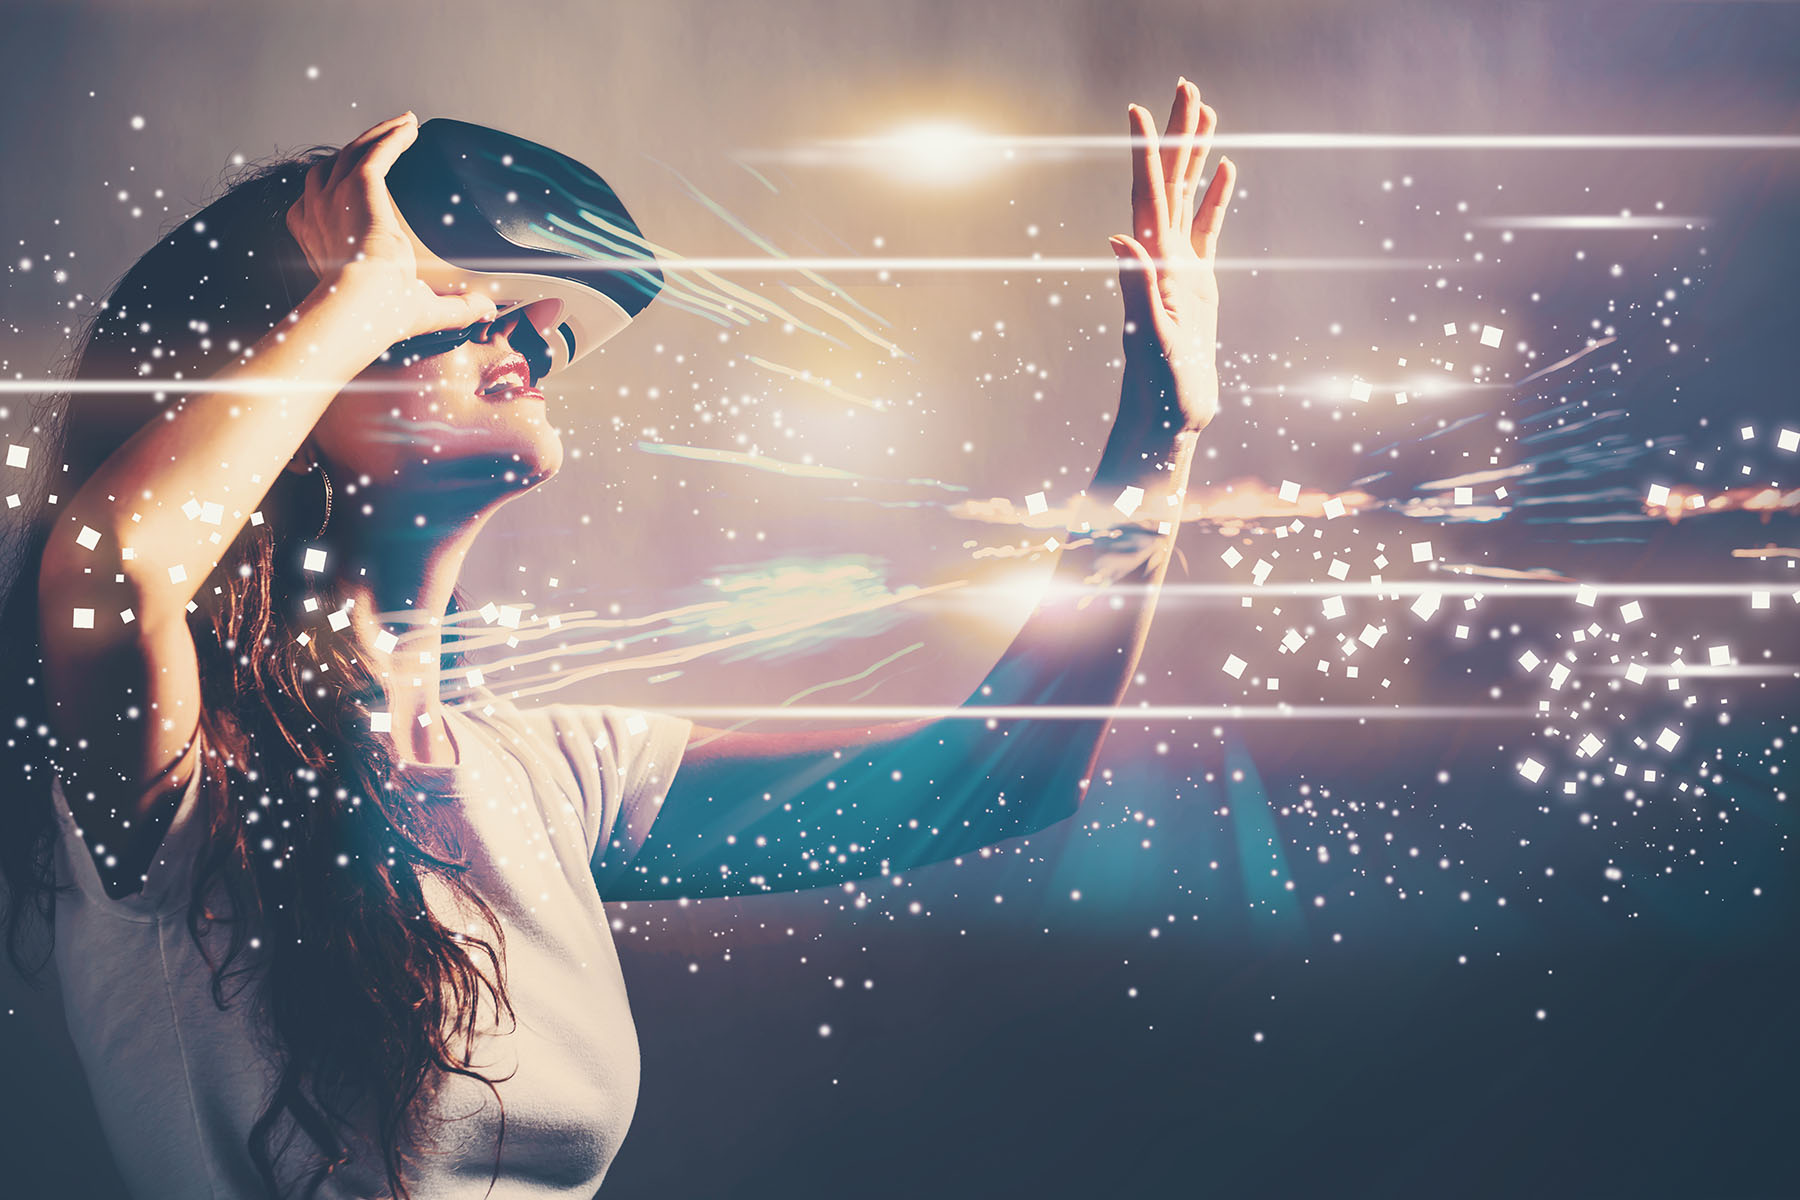 Women wearing VR glasses with a explosion of light appearing in front of her